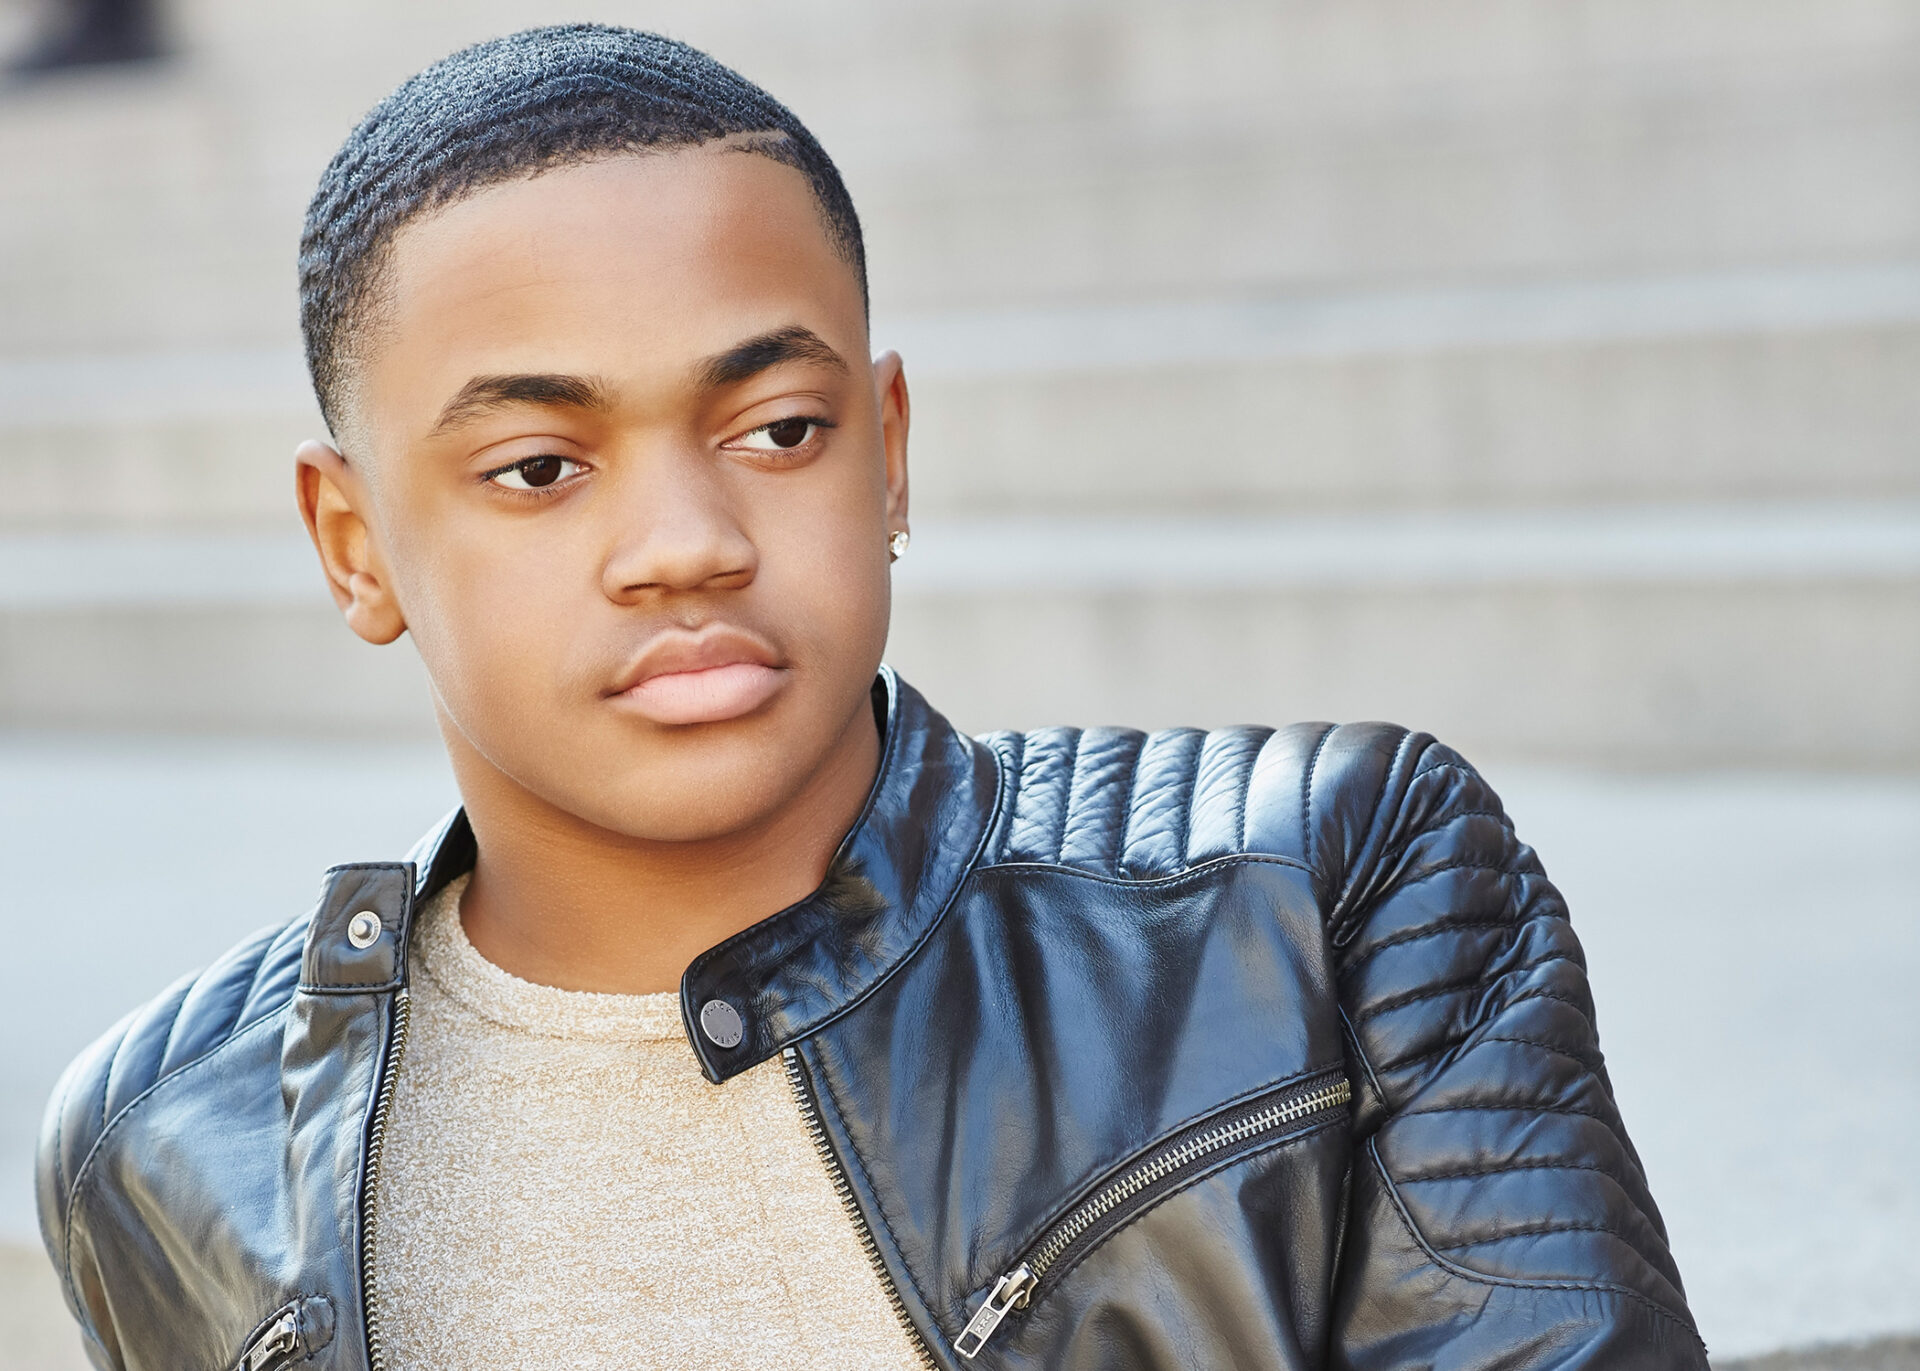 Michael Rainey Jr. Biography: Girlfriend, Net Worth, Age, Family, Height, Movies, Wiki, Parents, TV Shows